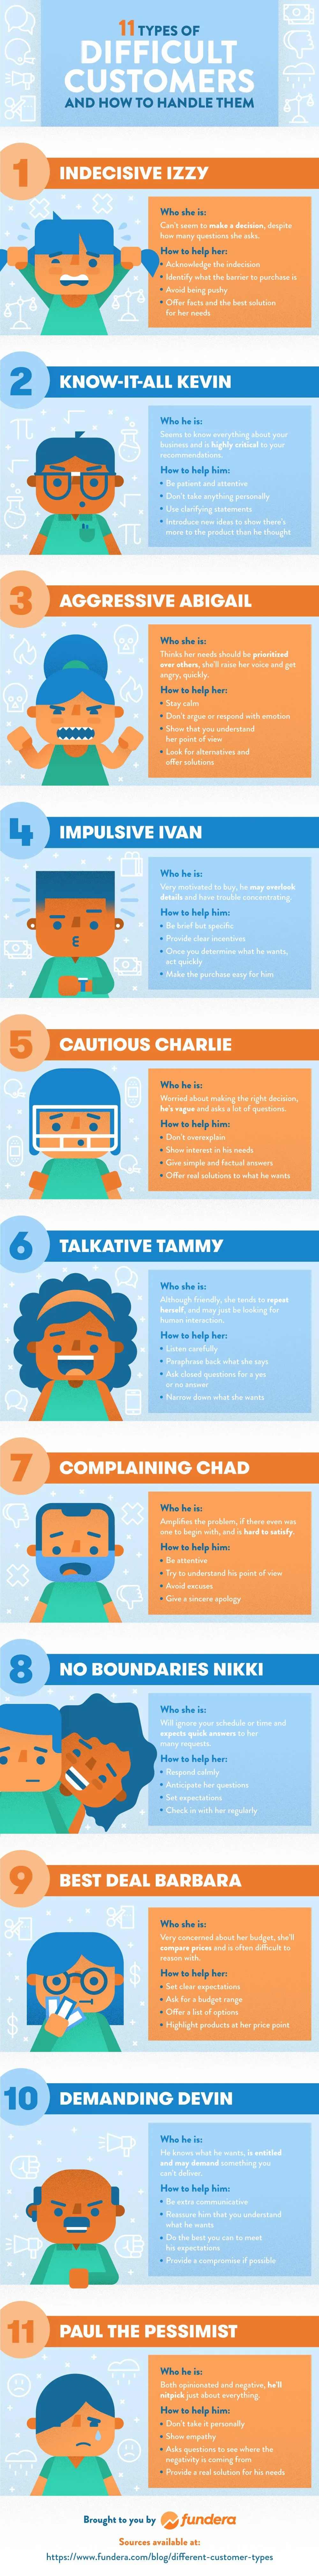 11 Types of Difficult Customers and How to Handle Them - #infographic